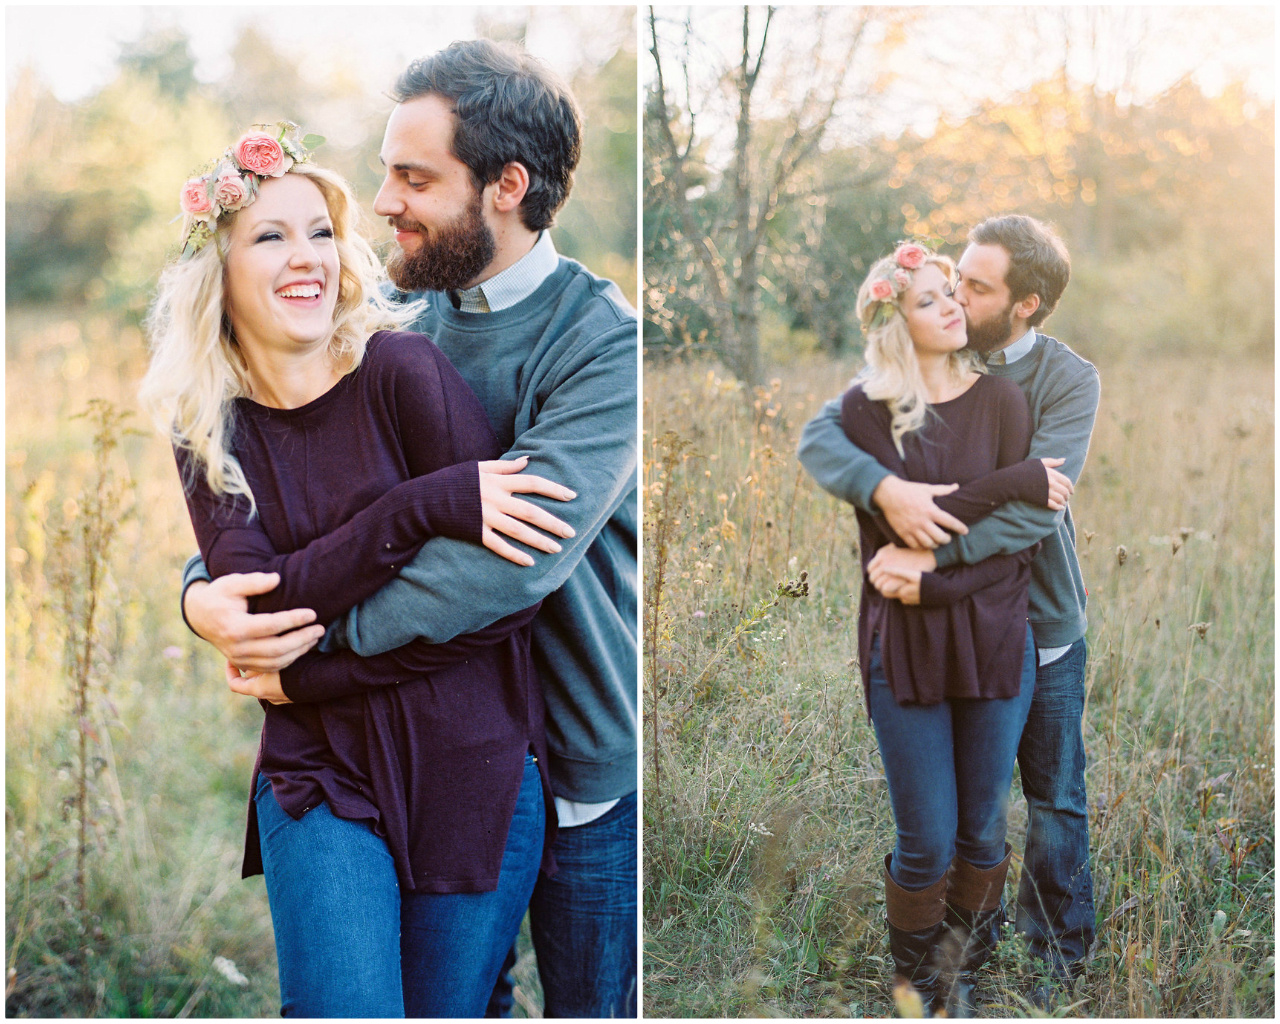 Grand Rapids Autumn Engagement Session | Ashley Slater Photography | Flower Crown | The Day's Design